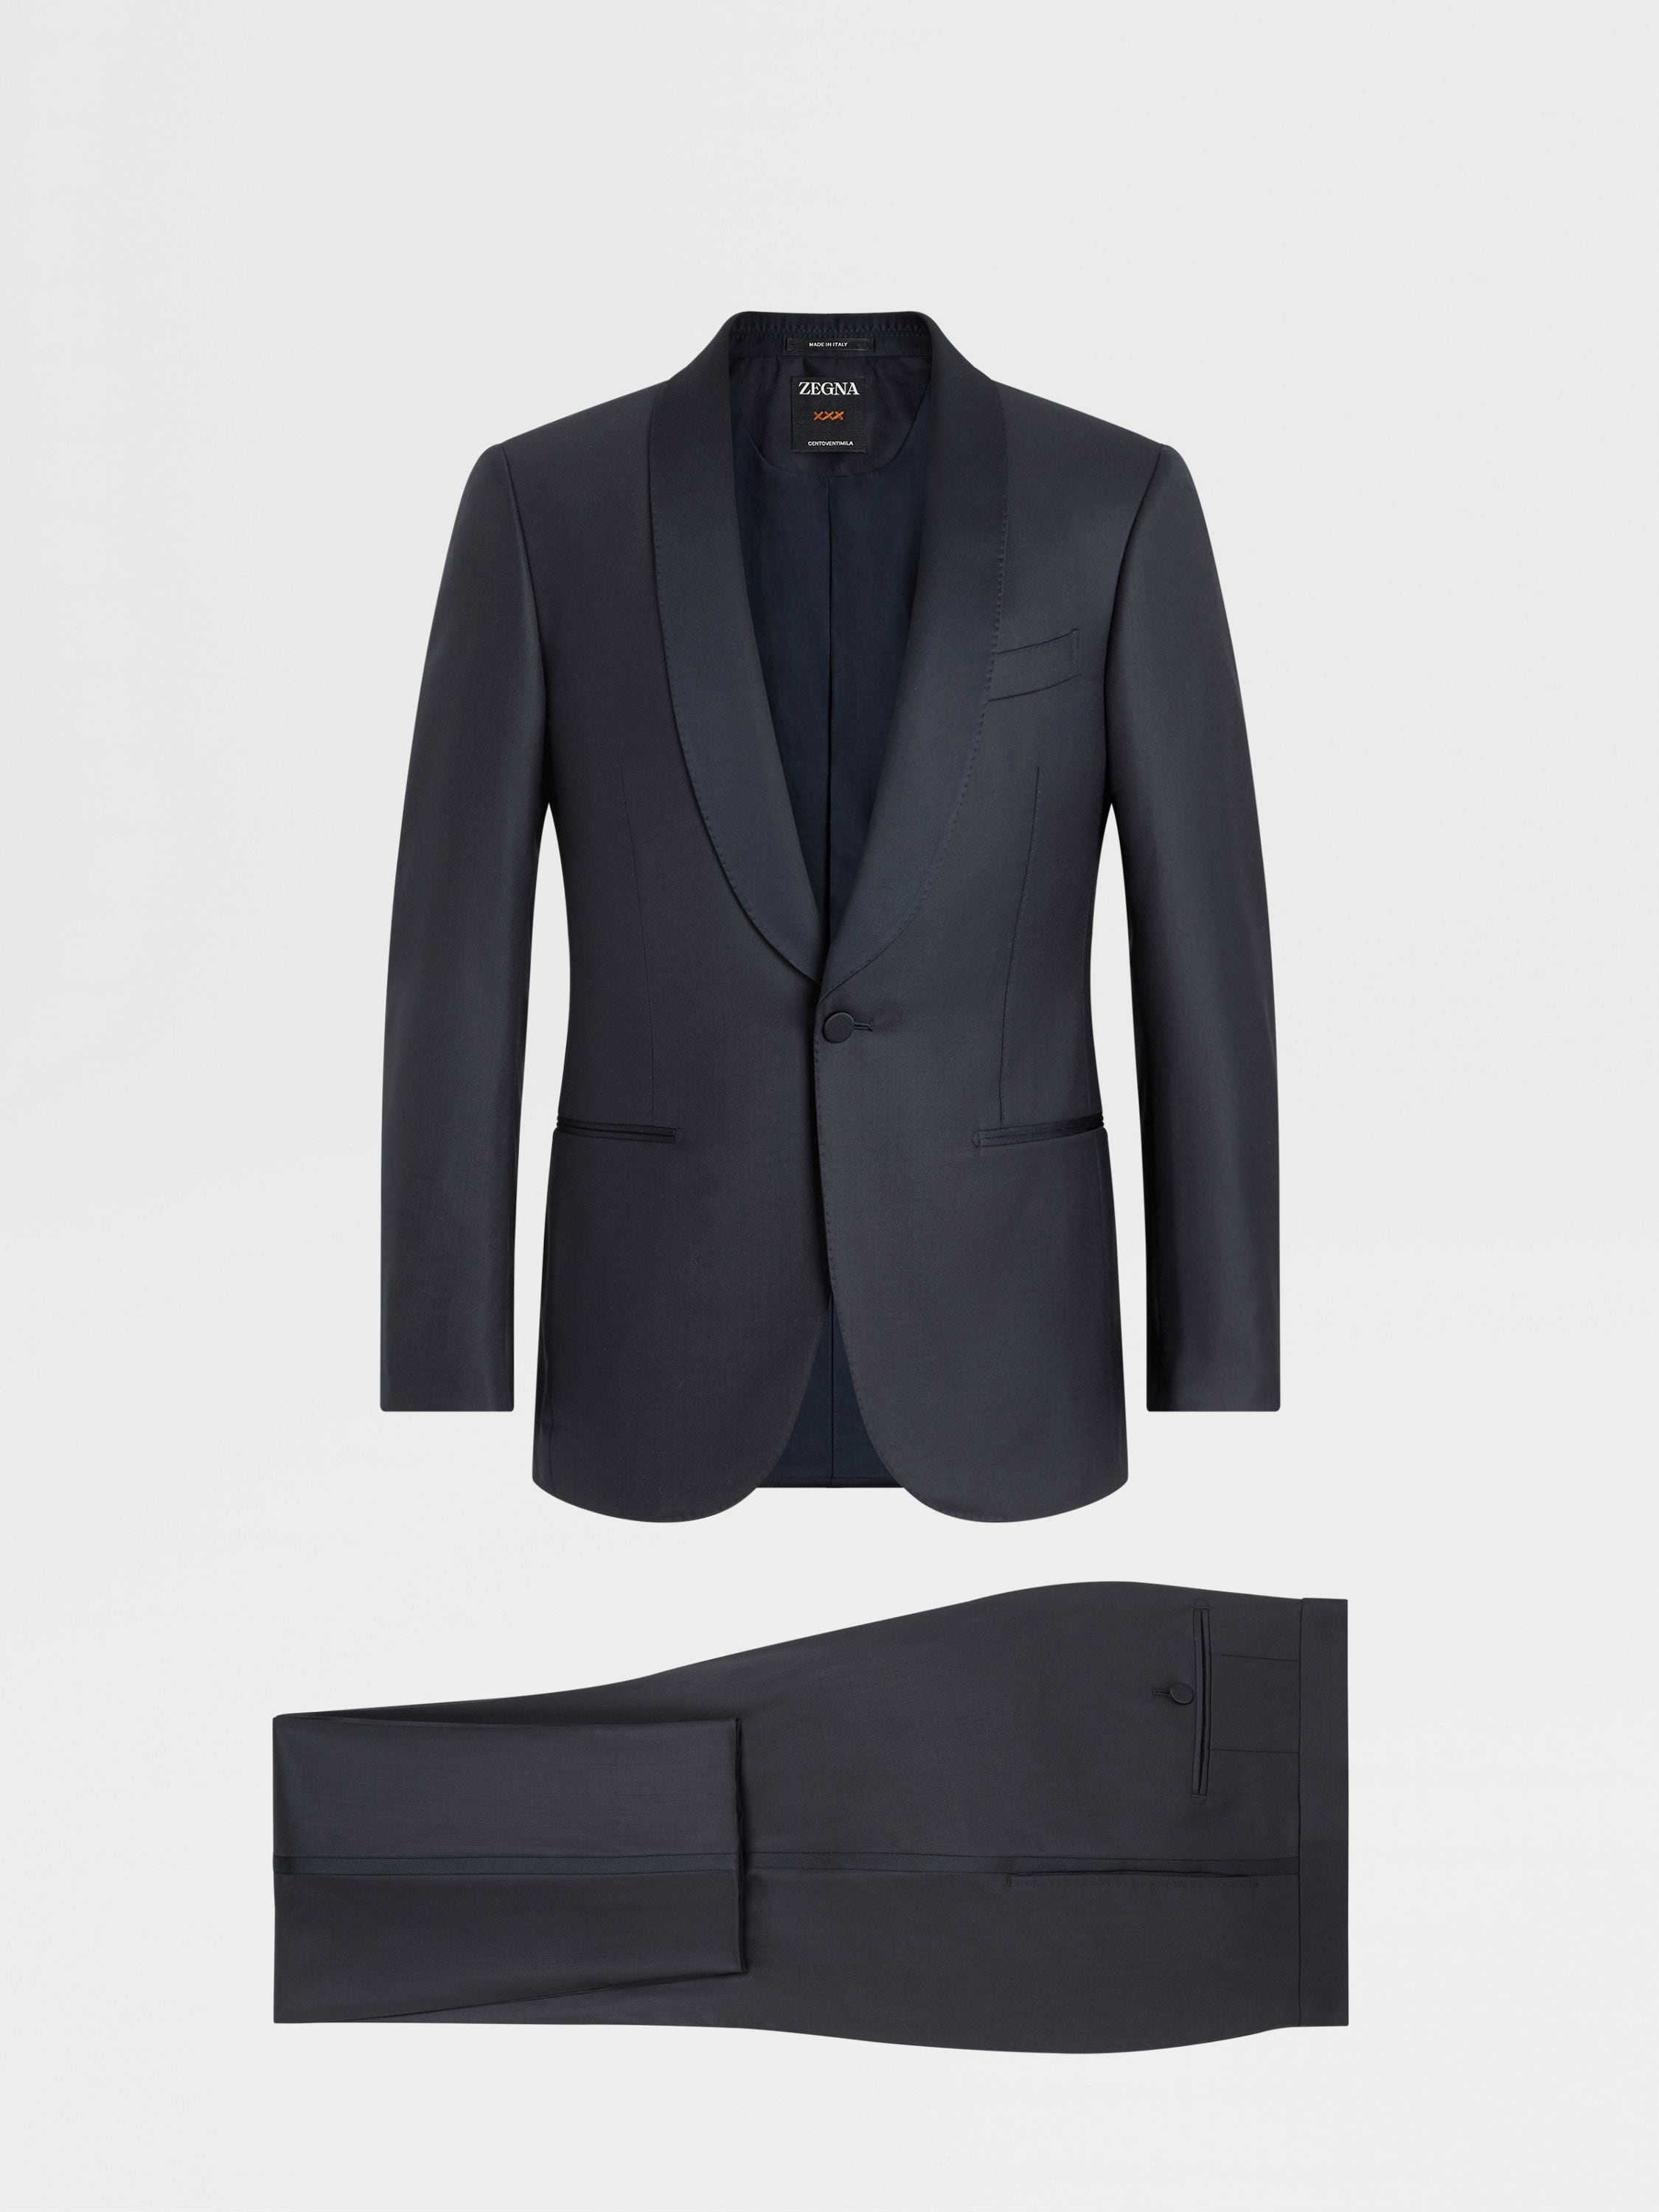 NAVY BLUE CENTOVENTIMILA WOOL SUIT - 1